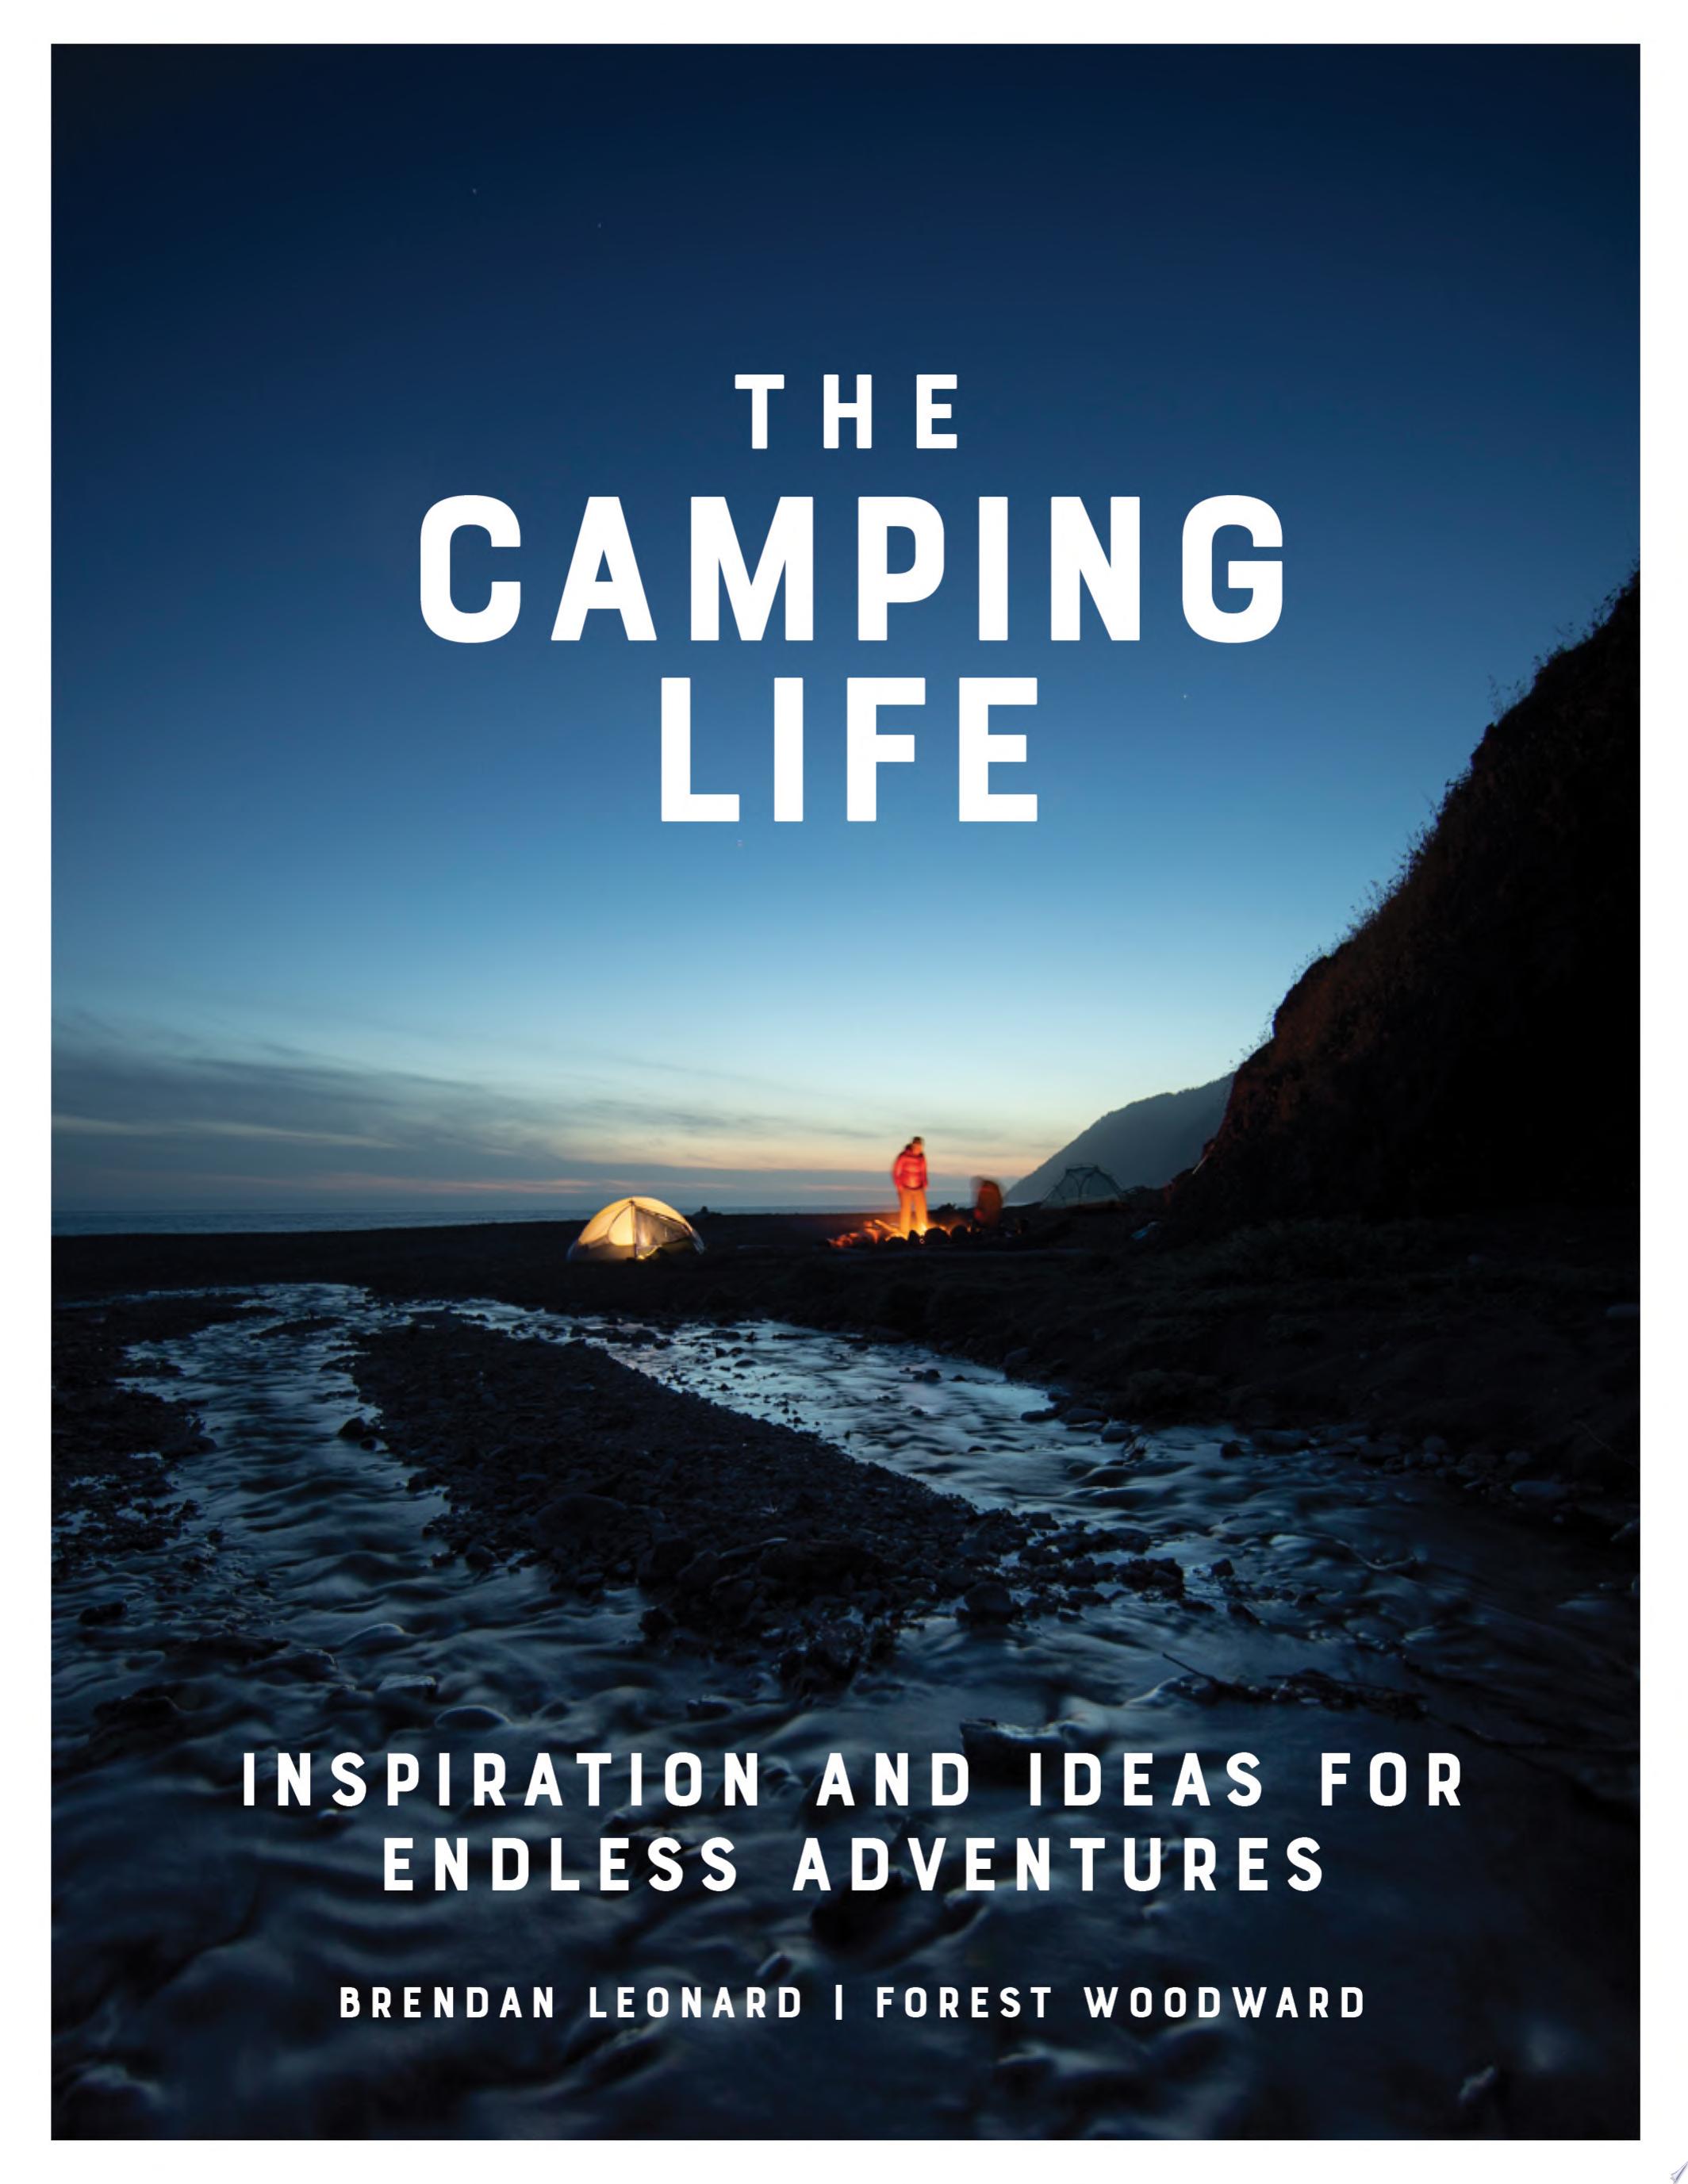 Image for "The Camping Life"